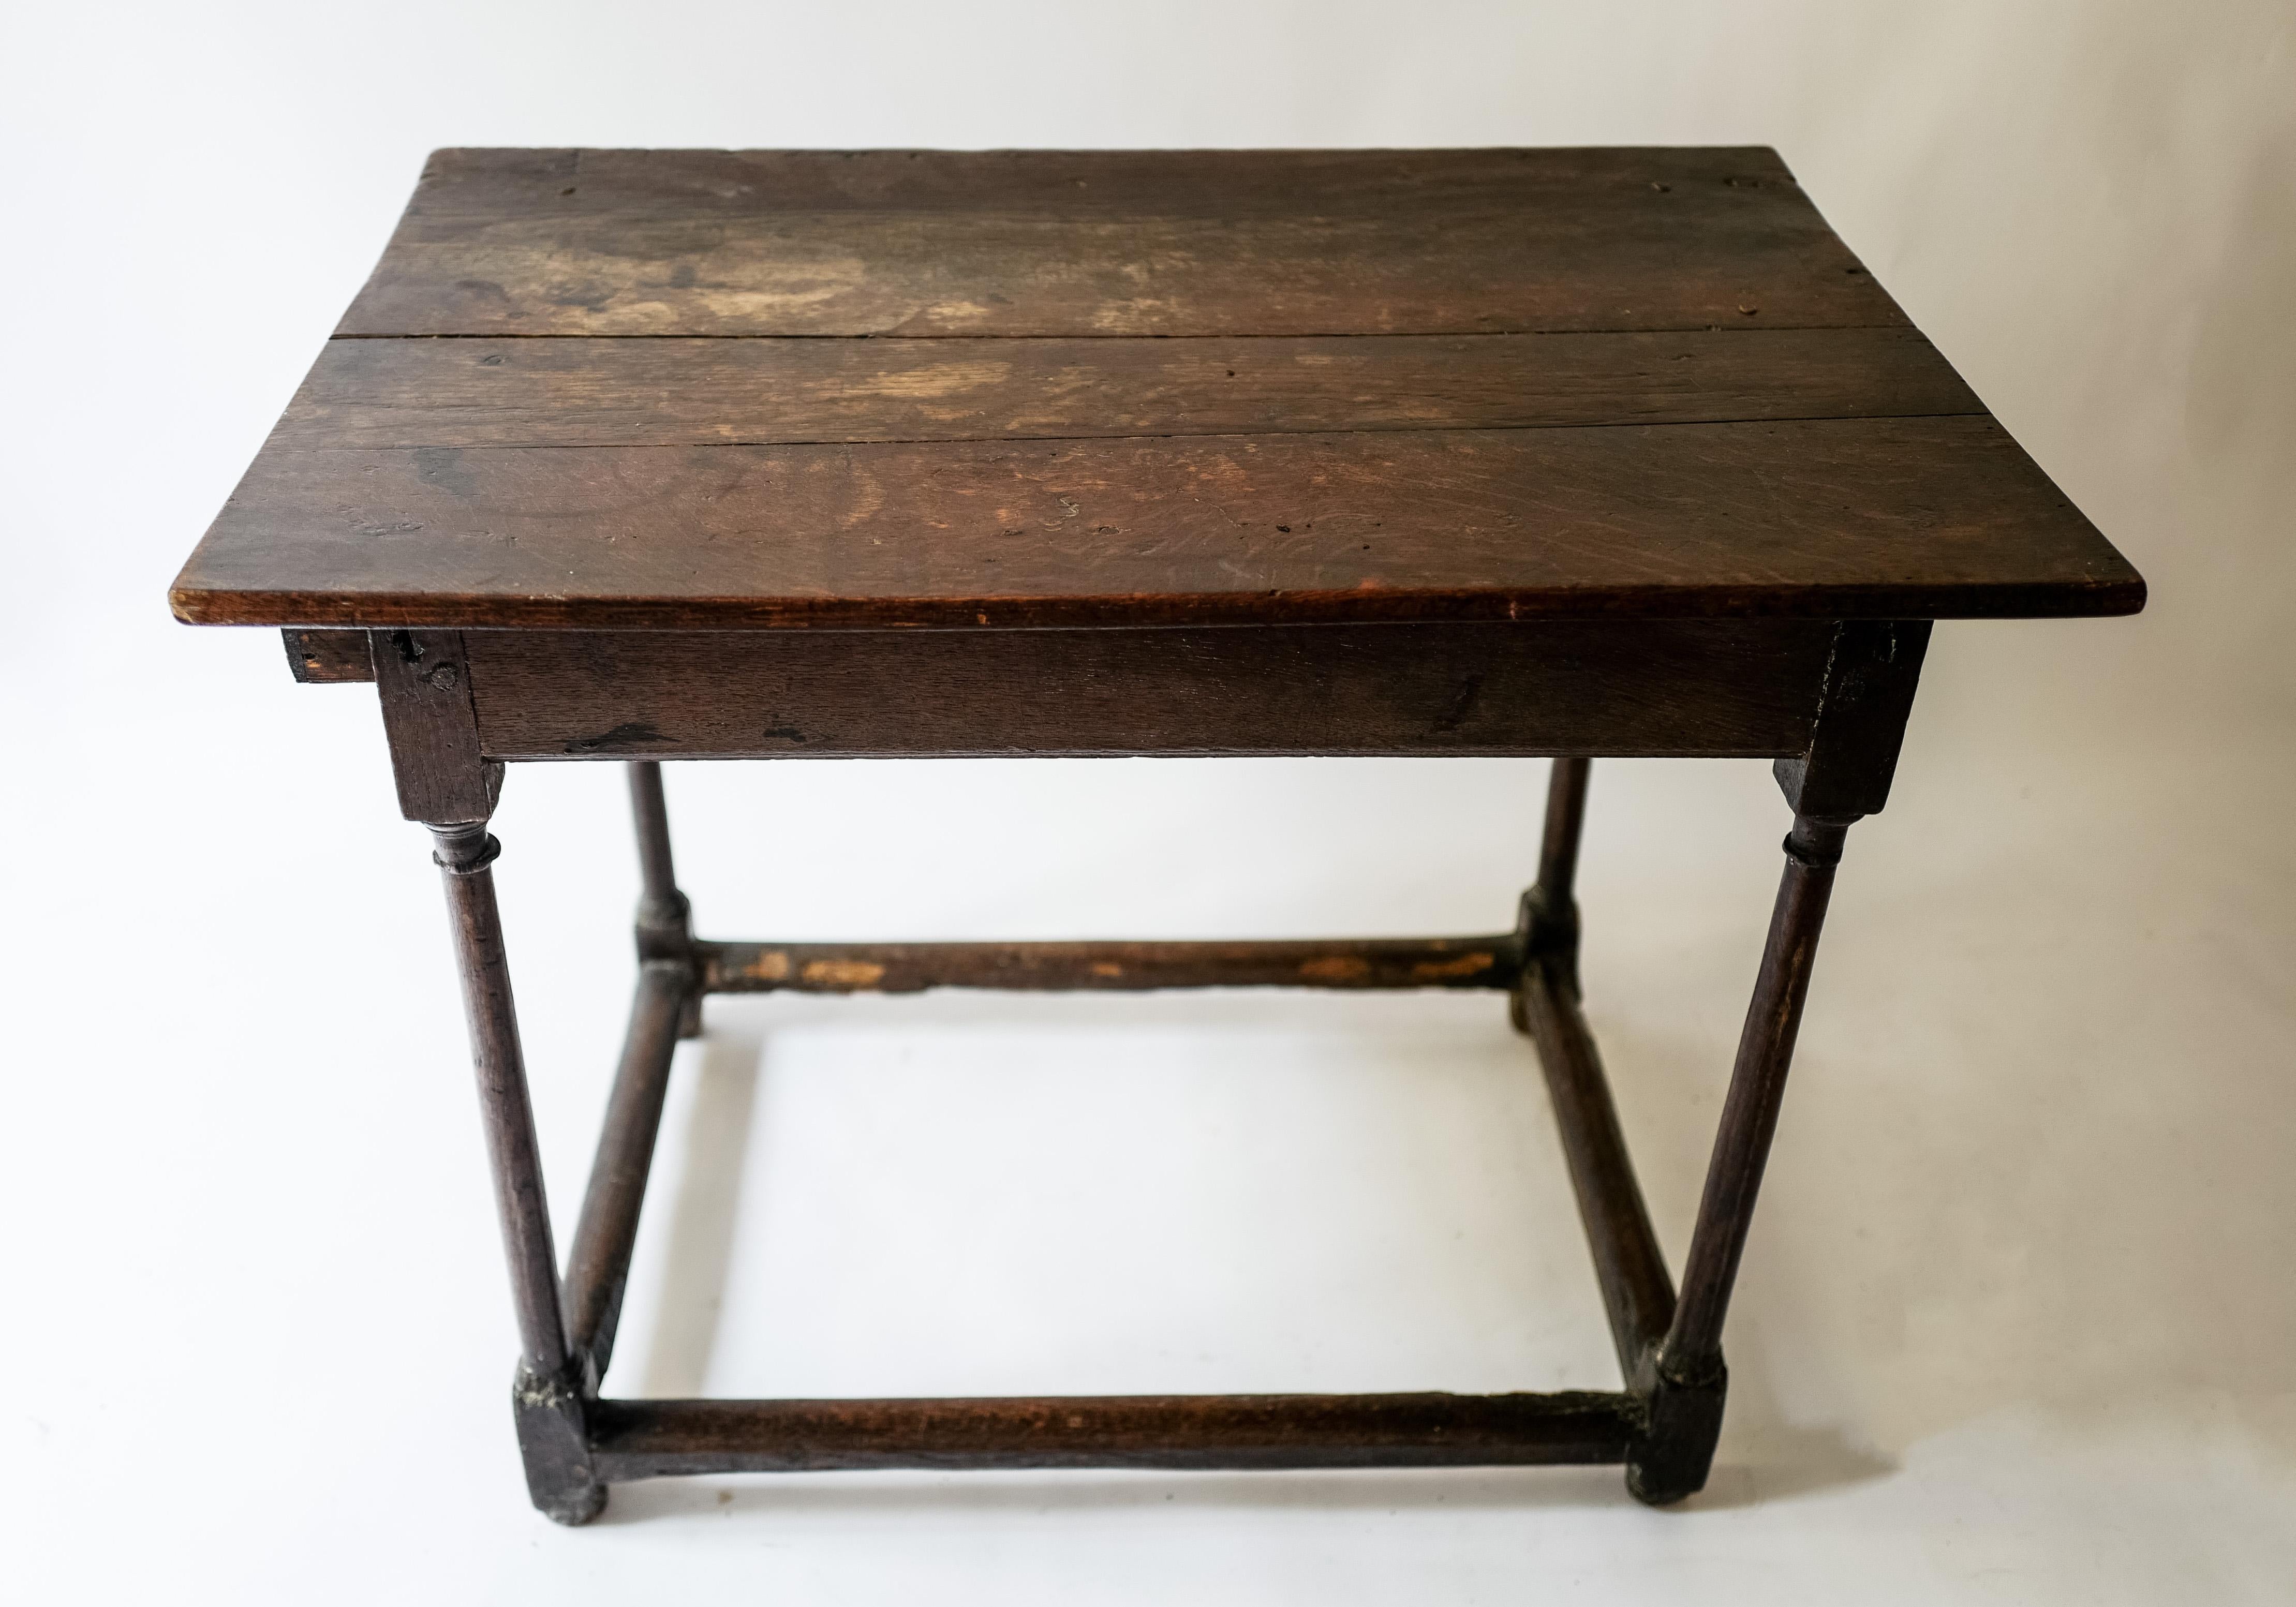 An 18th century Louis XVI oak side table with a single pull out drawer on one side. Beautiful time worn patin from Provence, France.